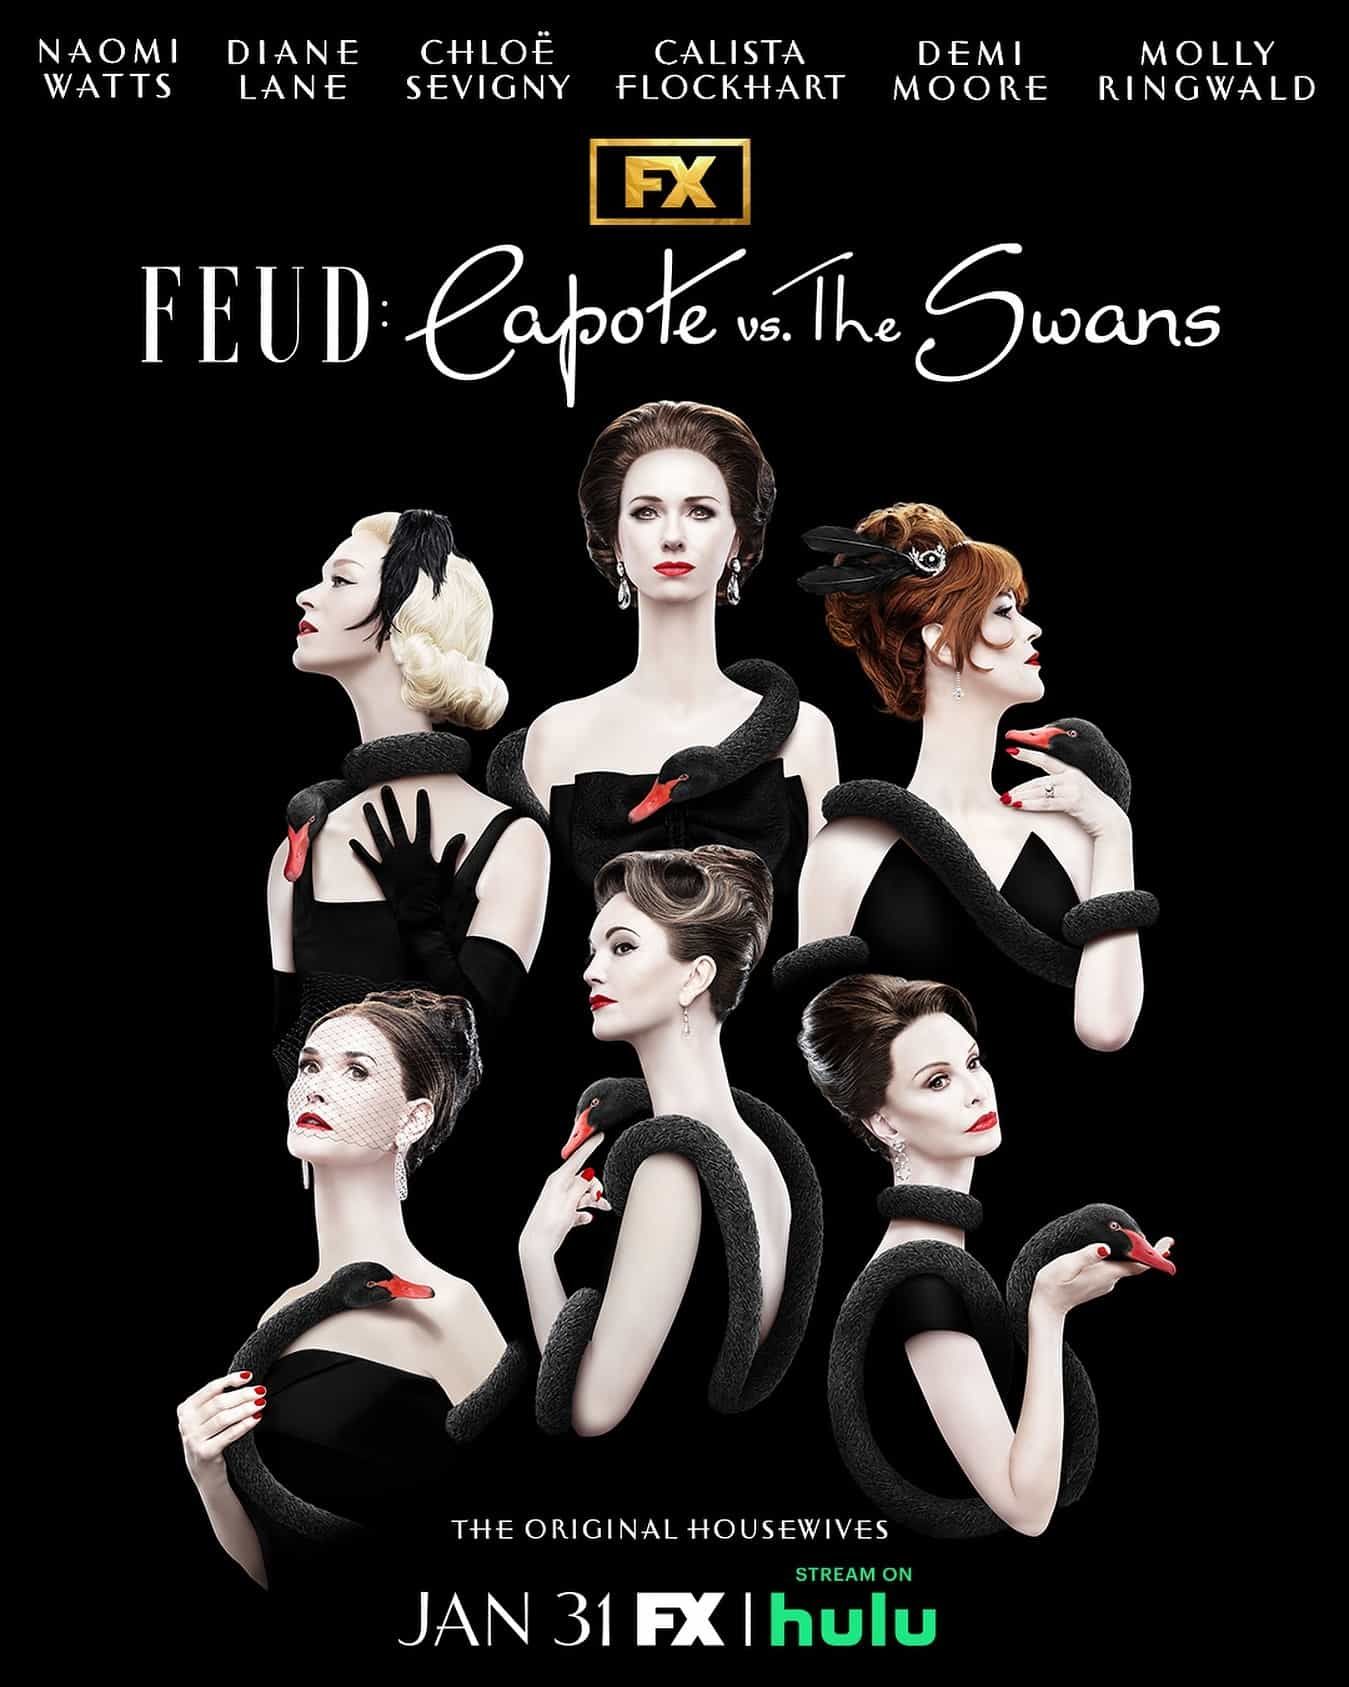 FEUD Capote Vs The Swans Poster